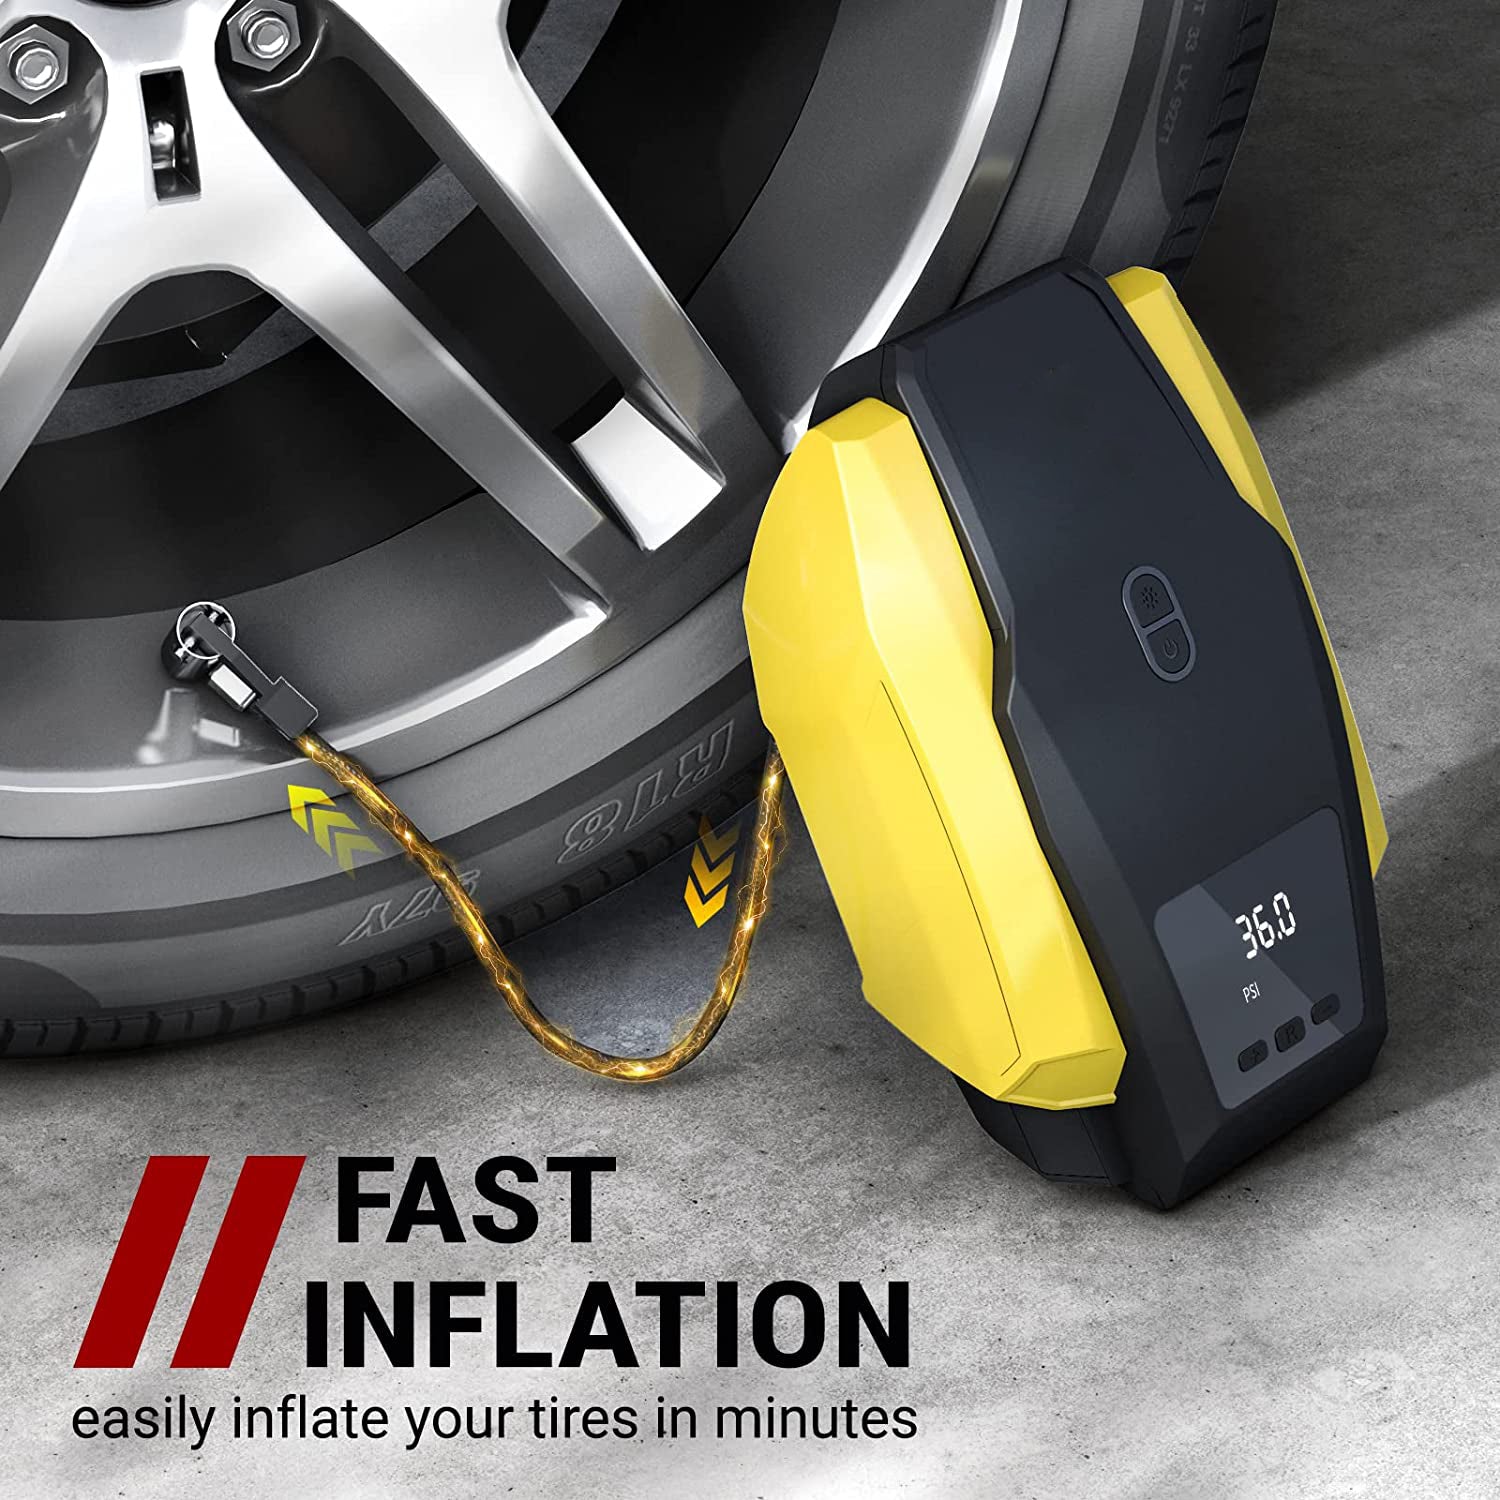 12V DC Auto Off Digital Tyre Inflator Pump with LED Light